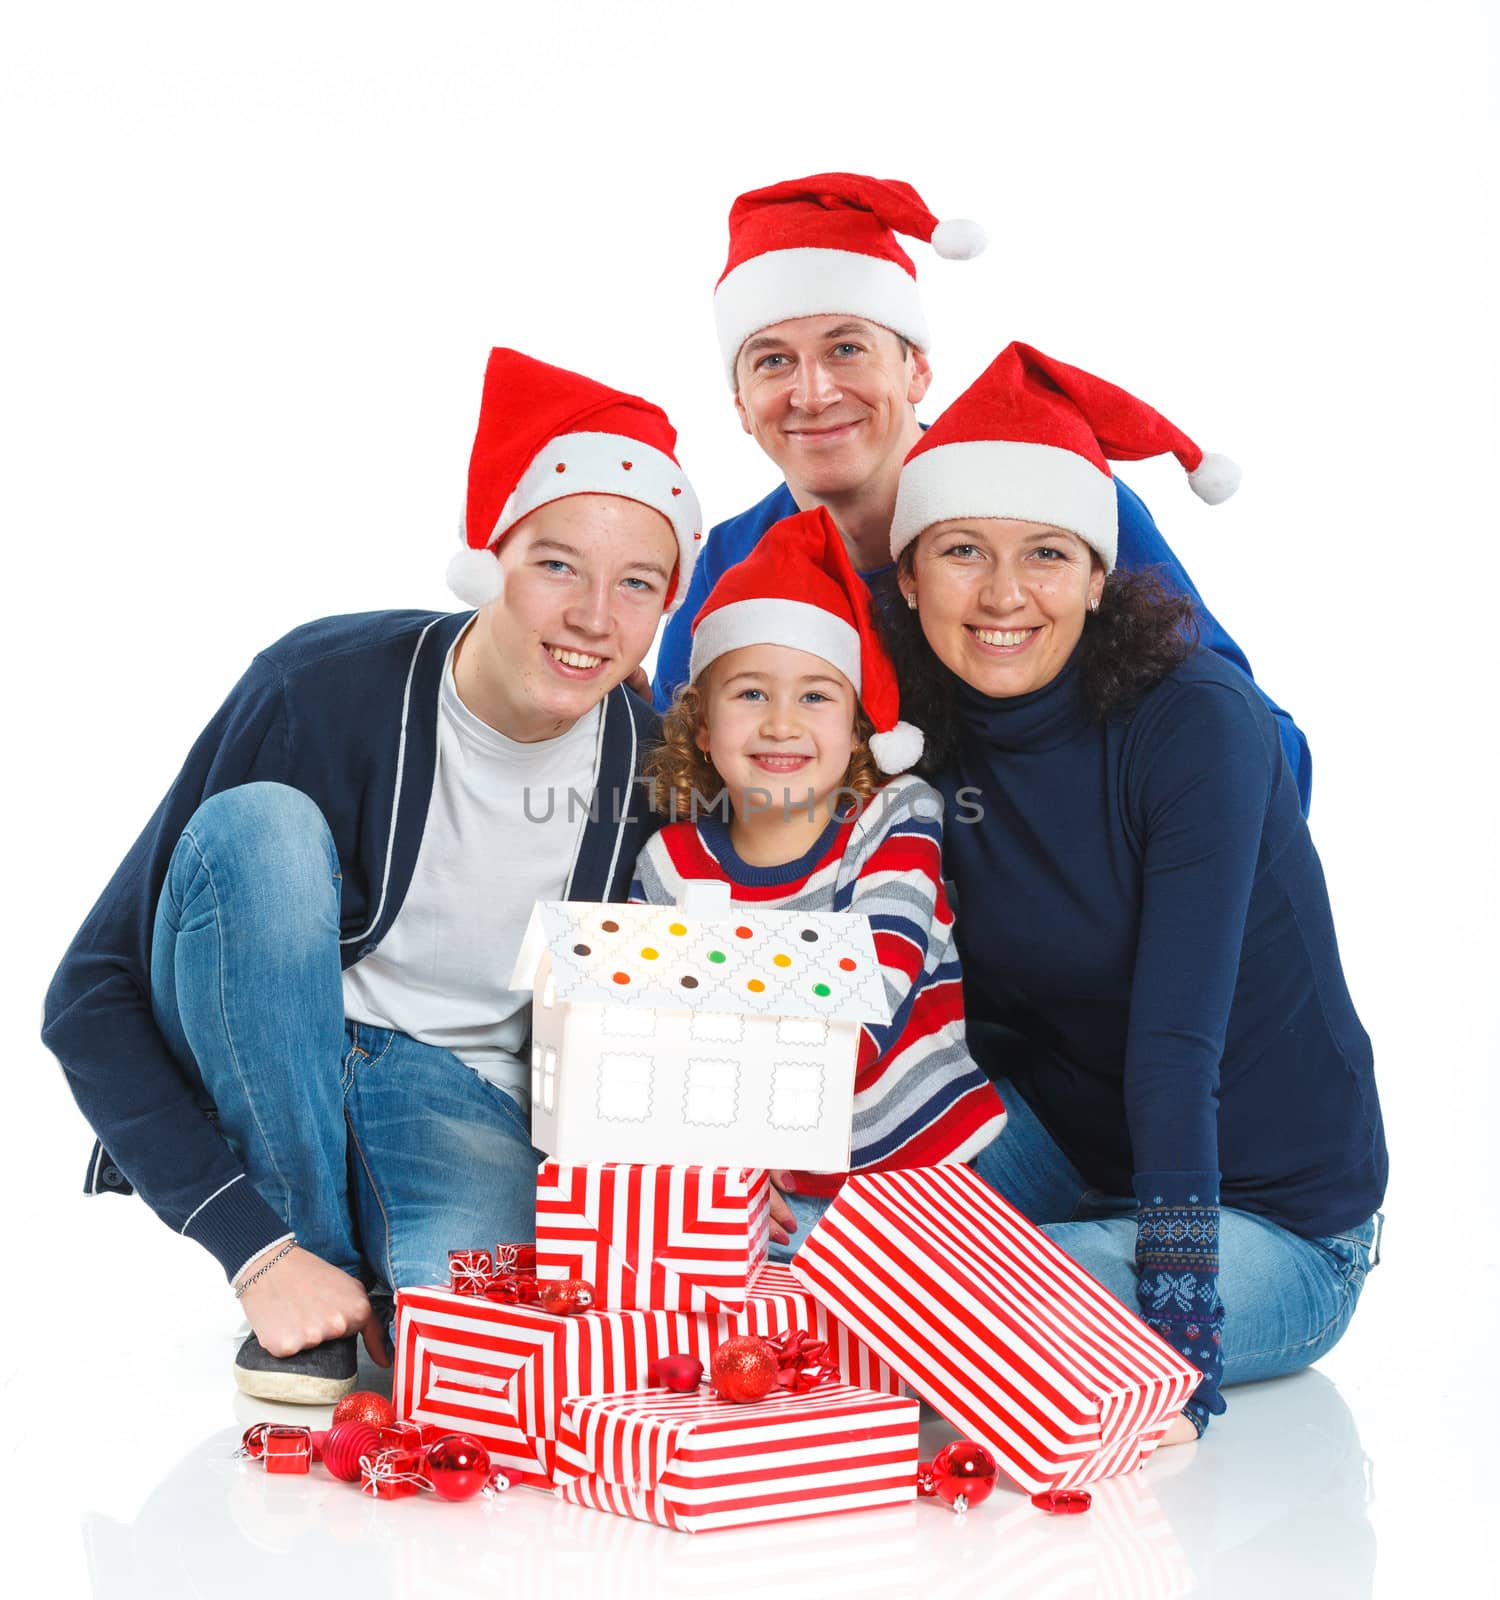 Christmas theme - Portrait of friendly family in Santa's hat with gift box, isolated on white